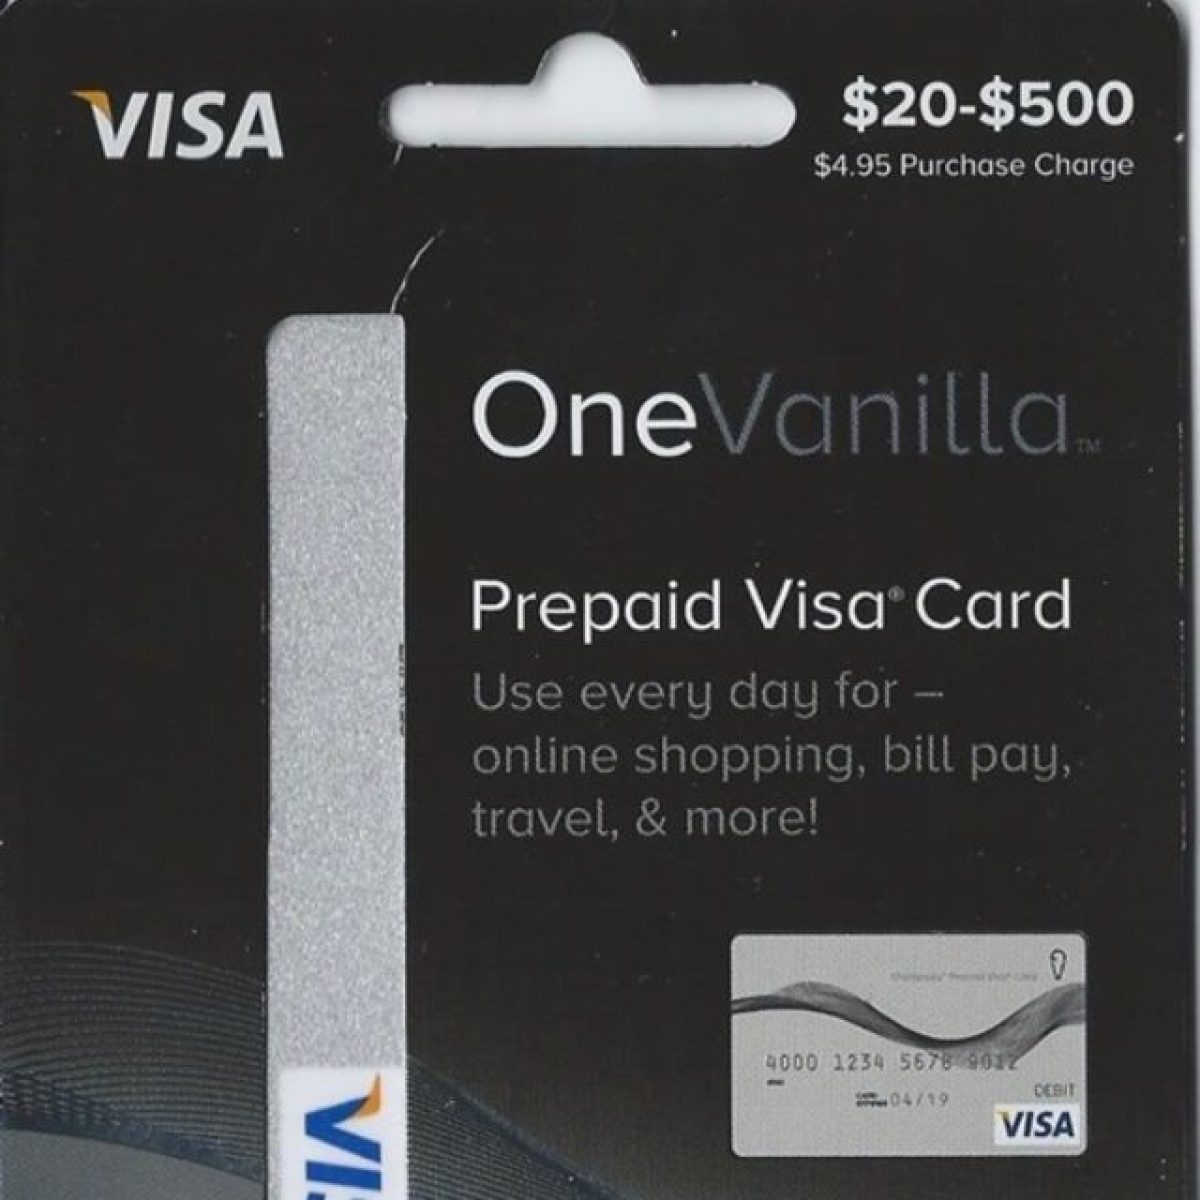 Choosing Between An Amex Or Visa Gift Card: What's the Difference? -  Cardtonic